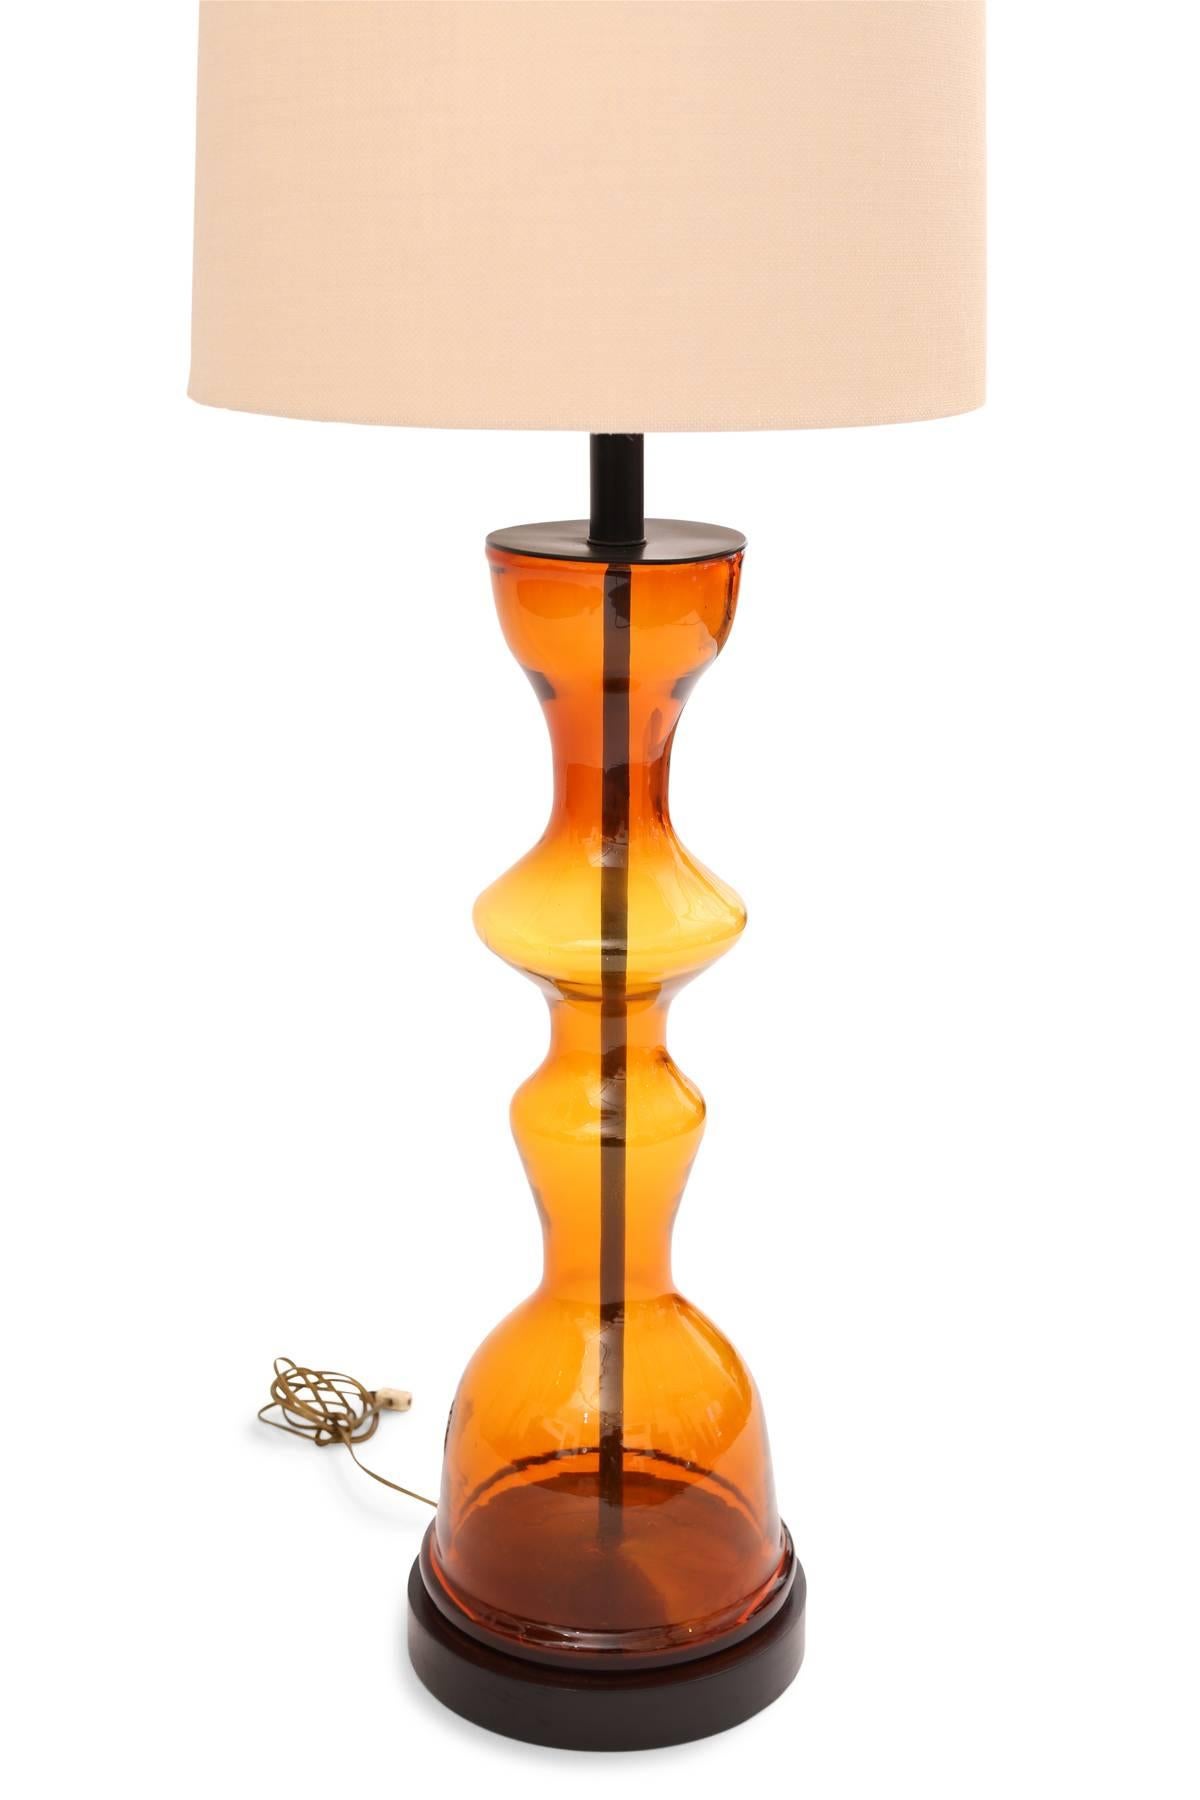 Wayne Husted for Blenko blown glass table lamp, circa late 1960s. This large-scale example has hues of yellows oranges and reds within an incredibly sculptural form.